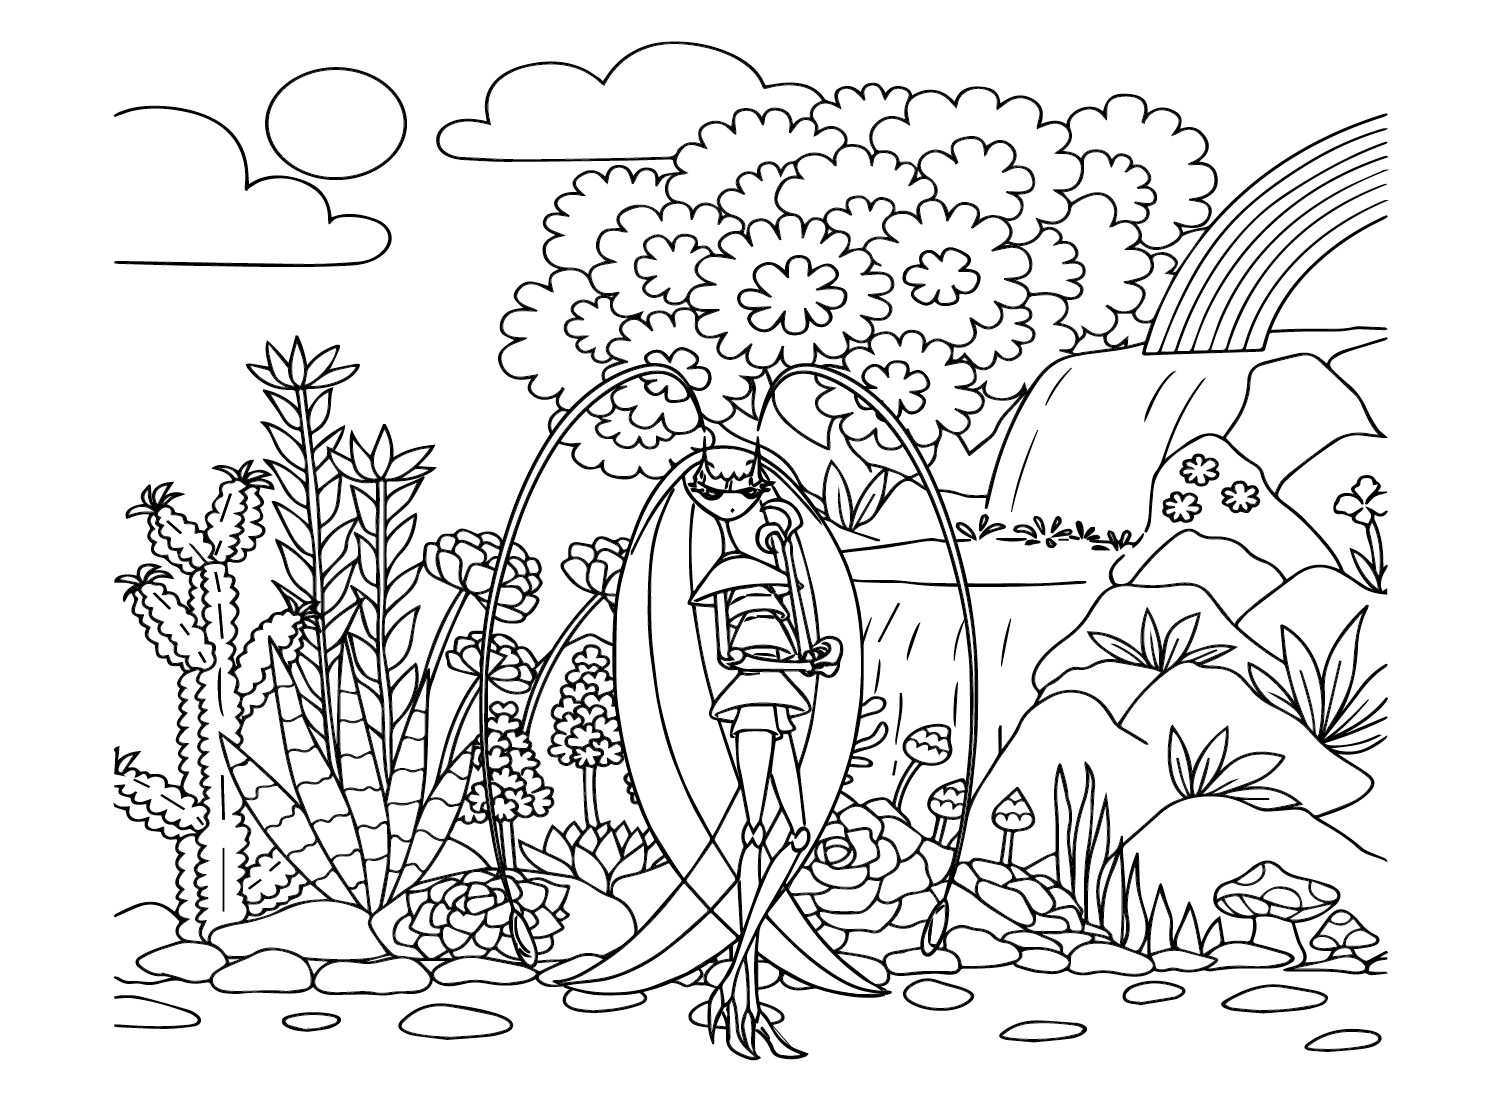 Pheromosa to Color Coloring Page